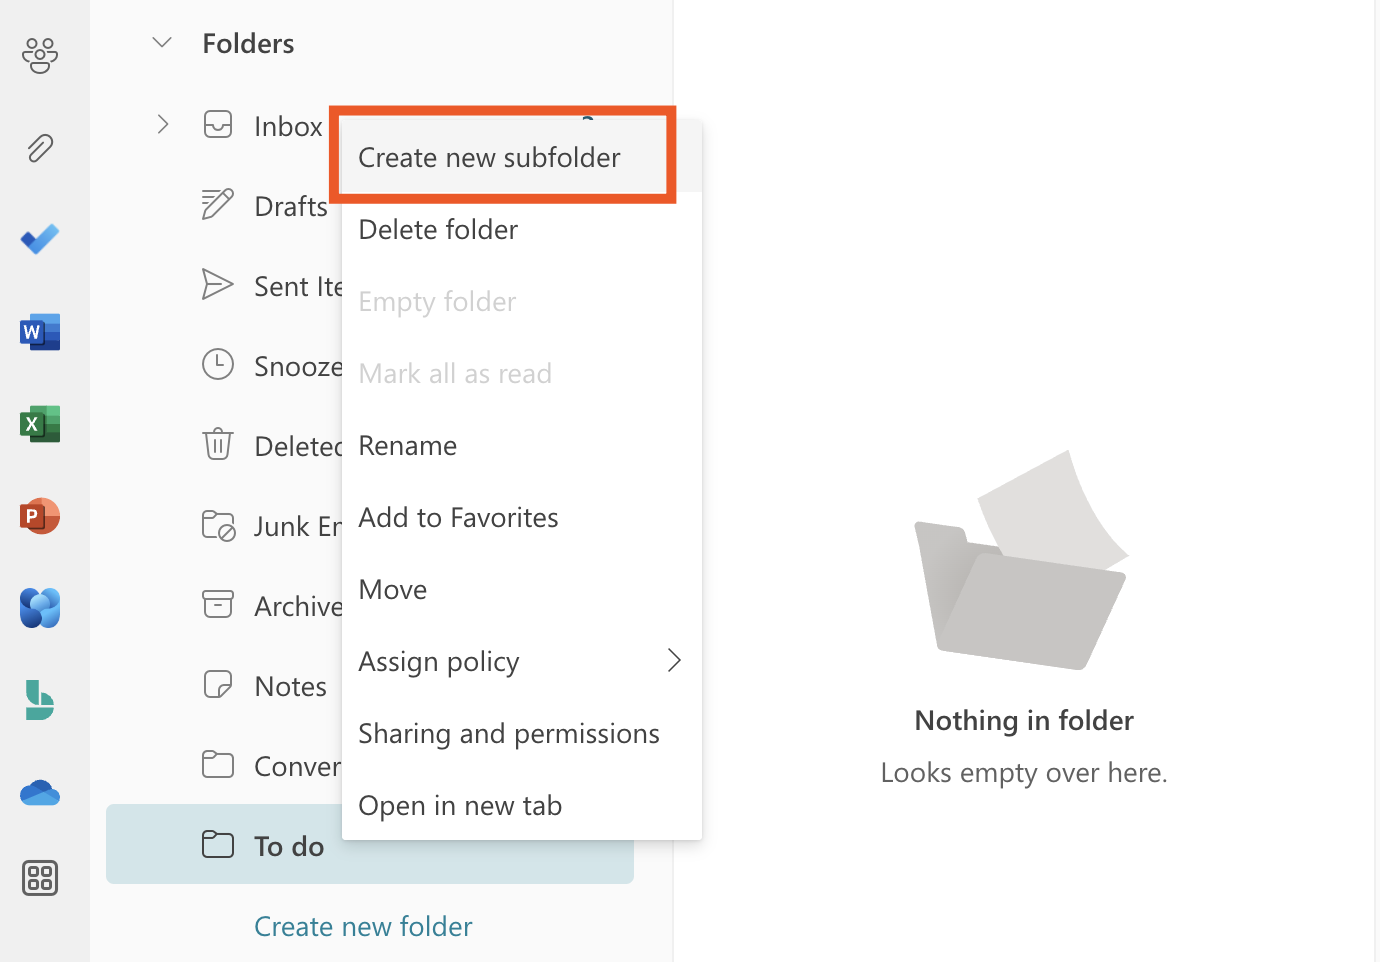 Expanded view of Microsoft Outlook folders. There's a "To do" folder dropdown menu with the option "Create new subfolder" highlighted.